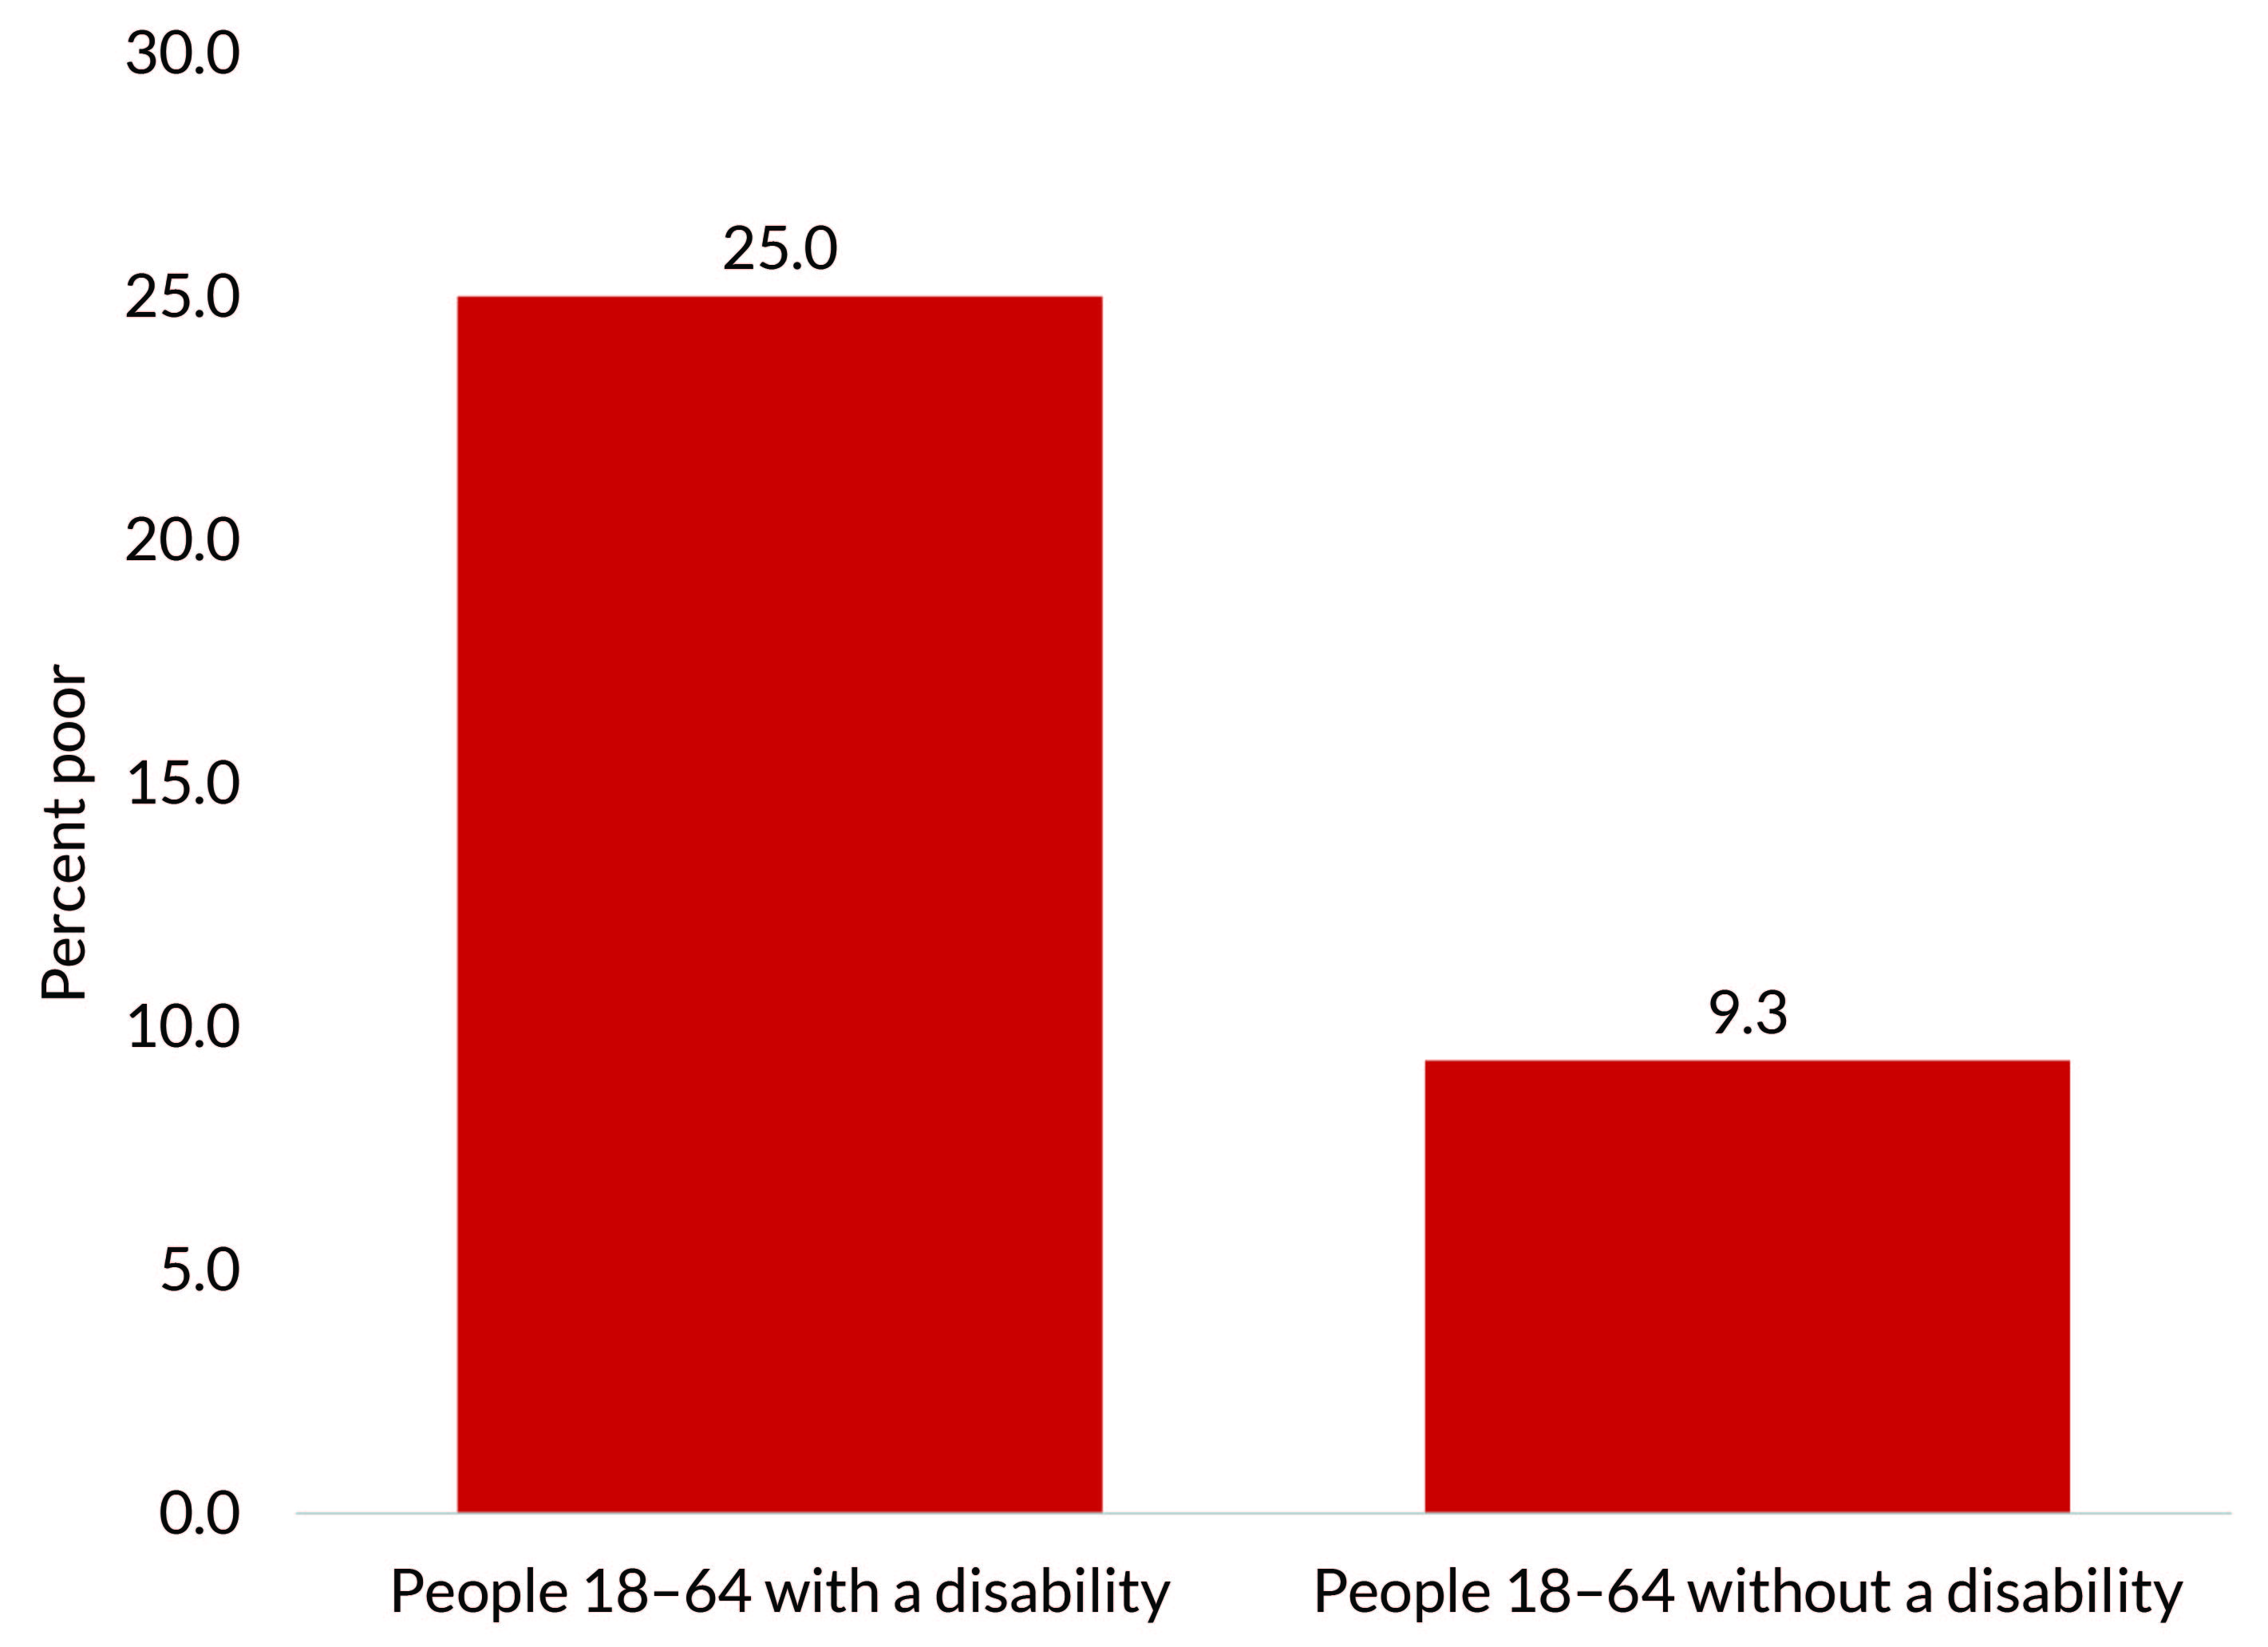 Bar chart showing poverty rate among people aged 18-64 with and without a disability. People with a disability 25.0%, and people without a disability 9.3%.